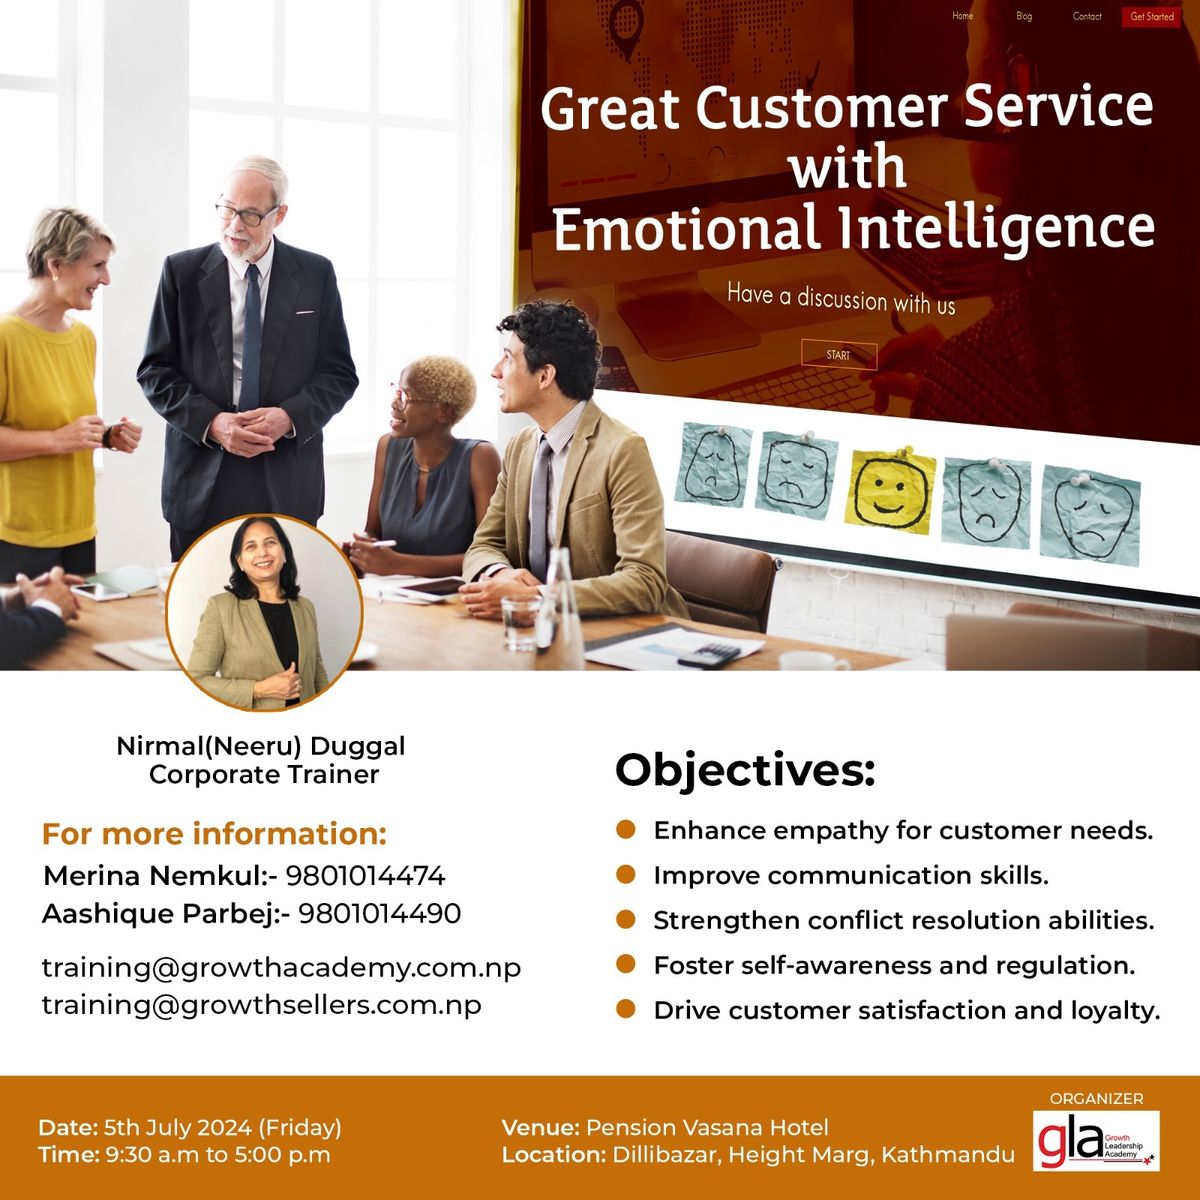 "Great Customer with Emotional Intelligence"